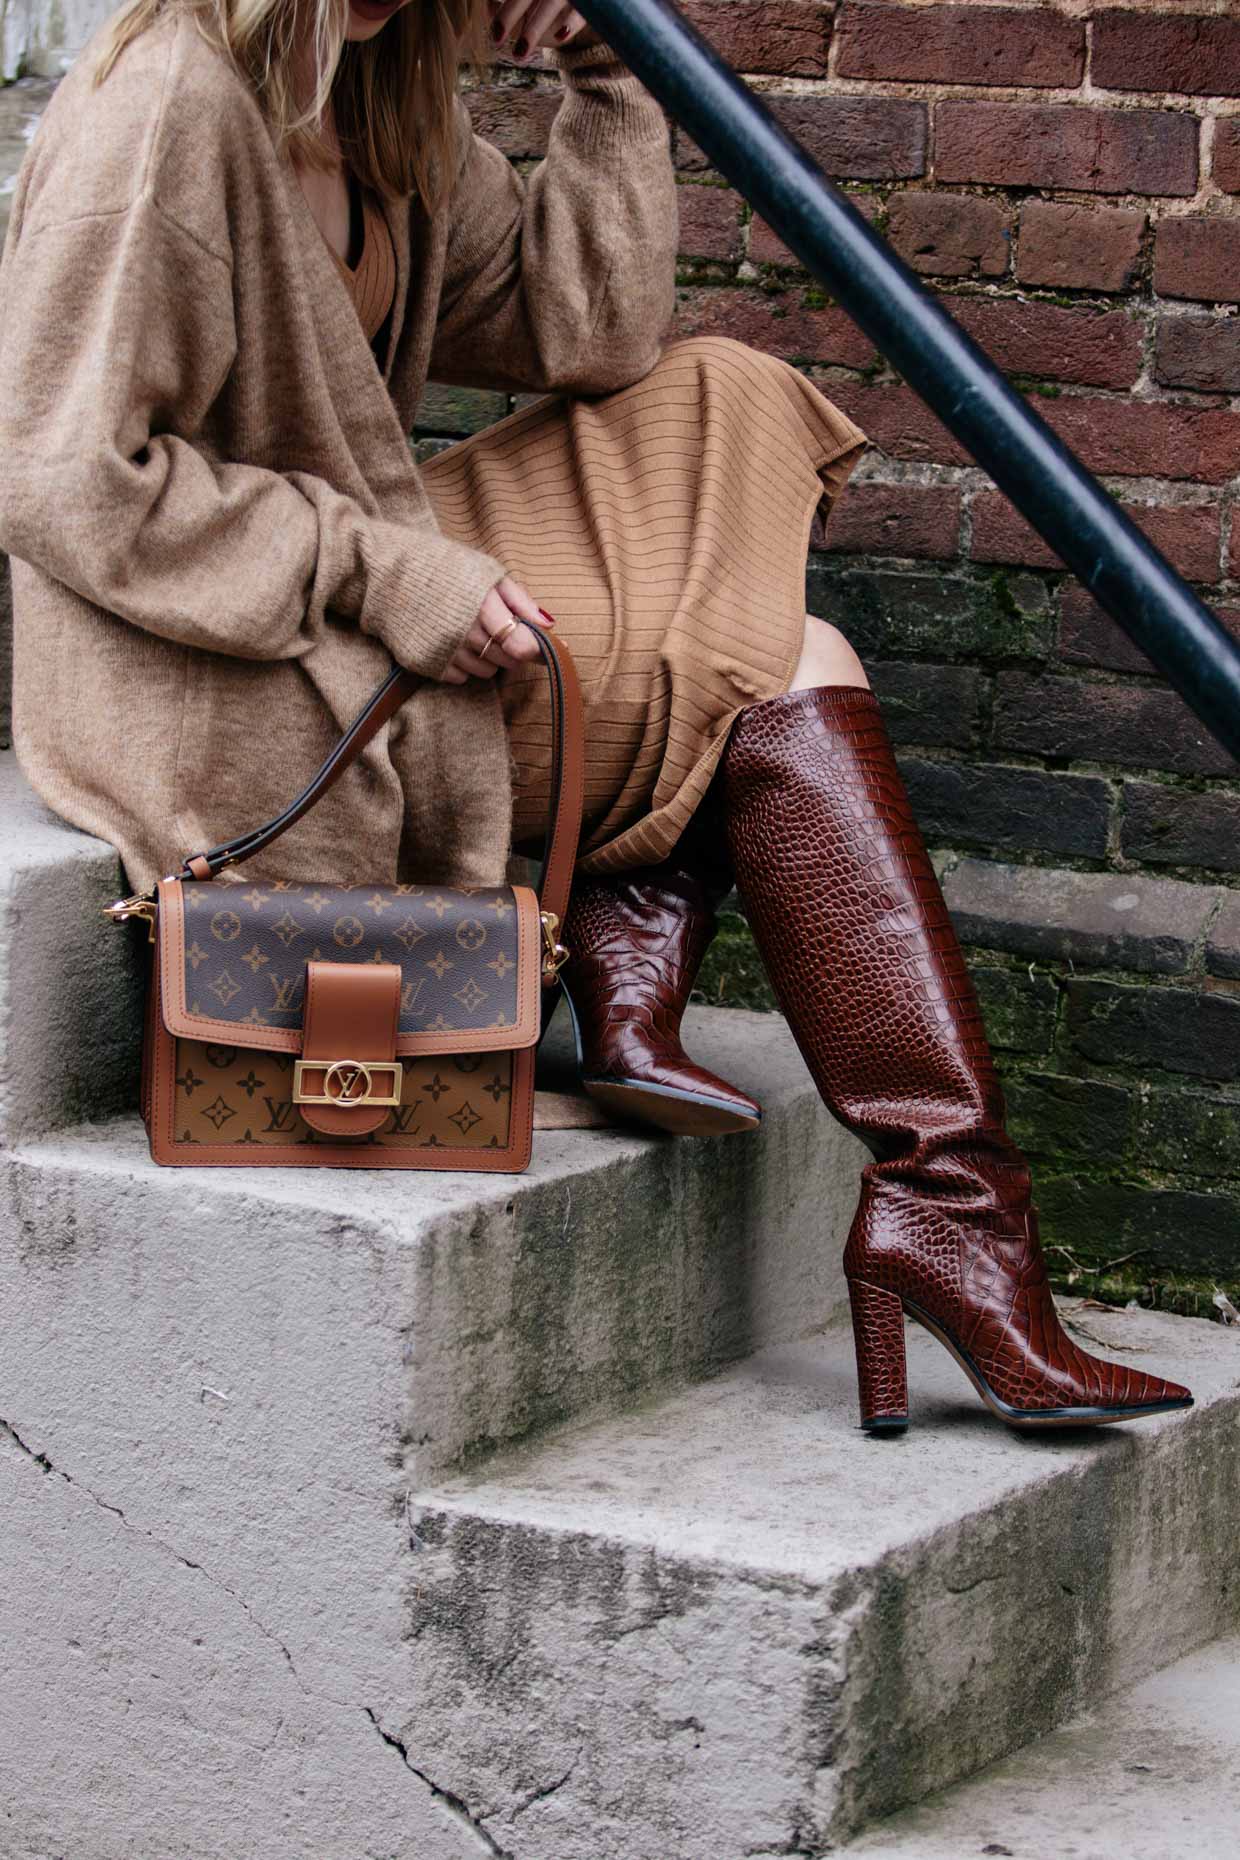 Meagan Brandon fashion blogger of Meagan's Moda wears rust colored poncho  with leather mini skirt, croc knee high boots and Louis Vuitton Dauphine -  Meagan's Moda